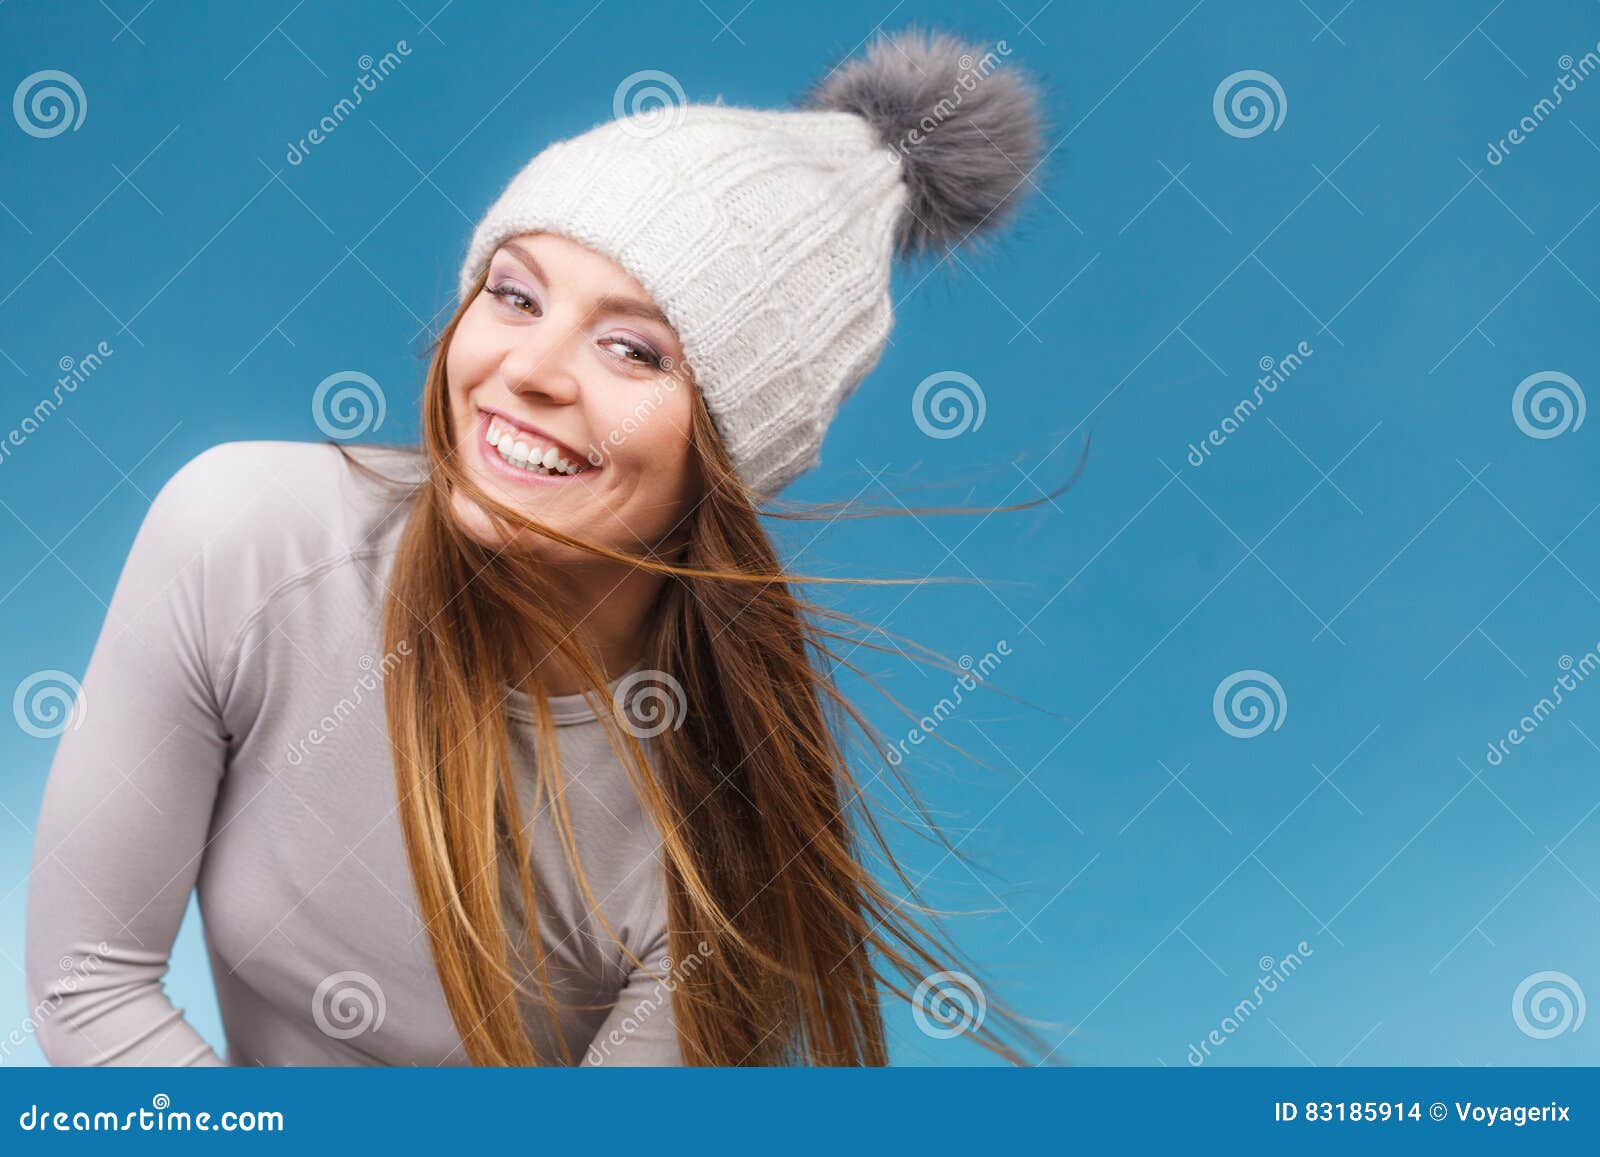 Woman in Thermal Underwear Wool Cap Stock Photo - Image of toothy ...